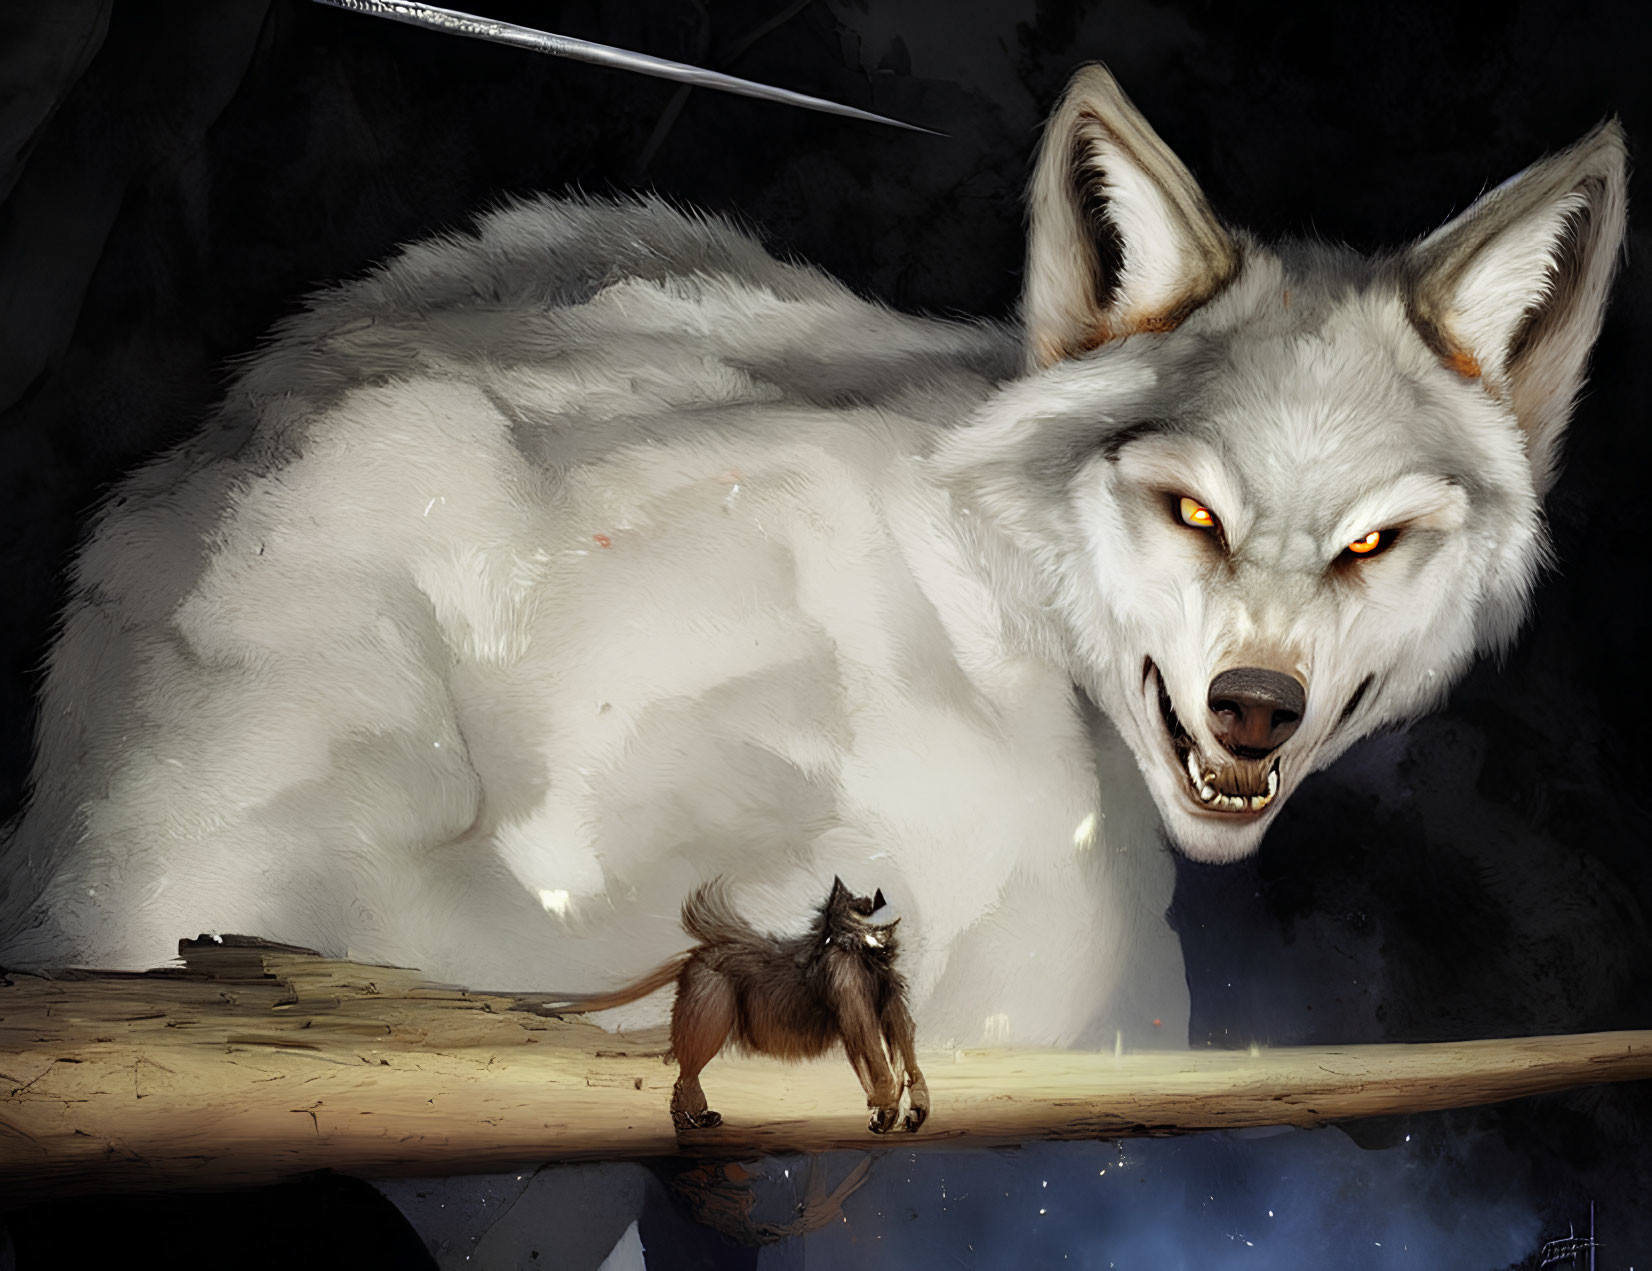 White wolf confronts brown cat on tree branch under dark sky with falling sword